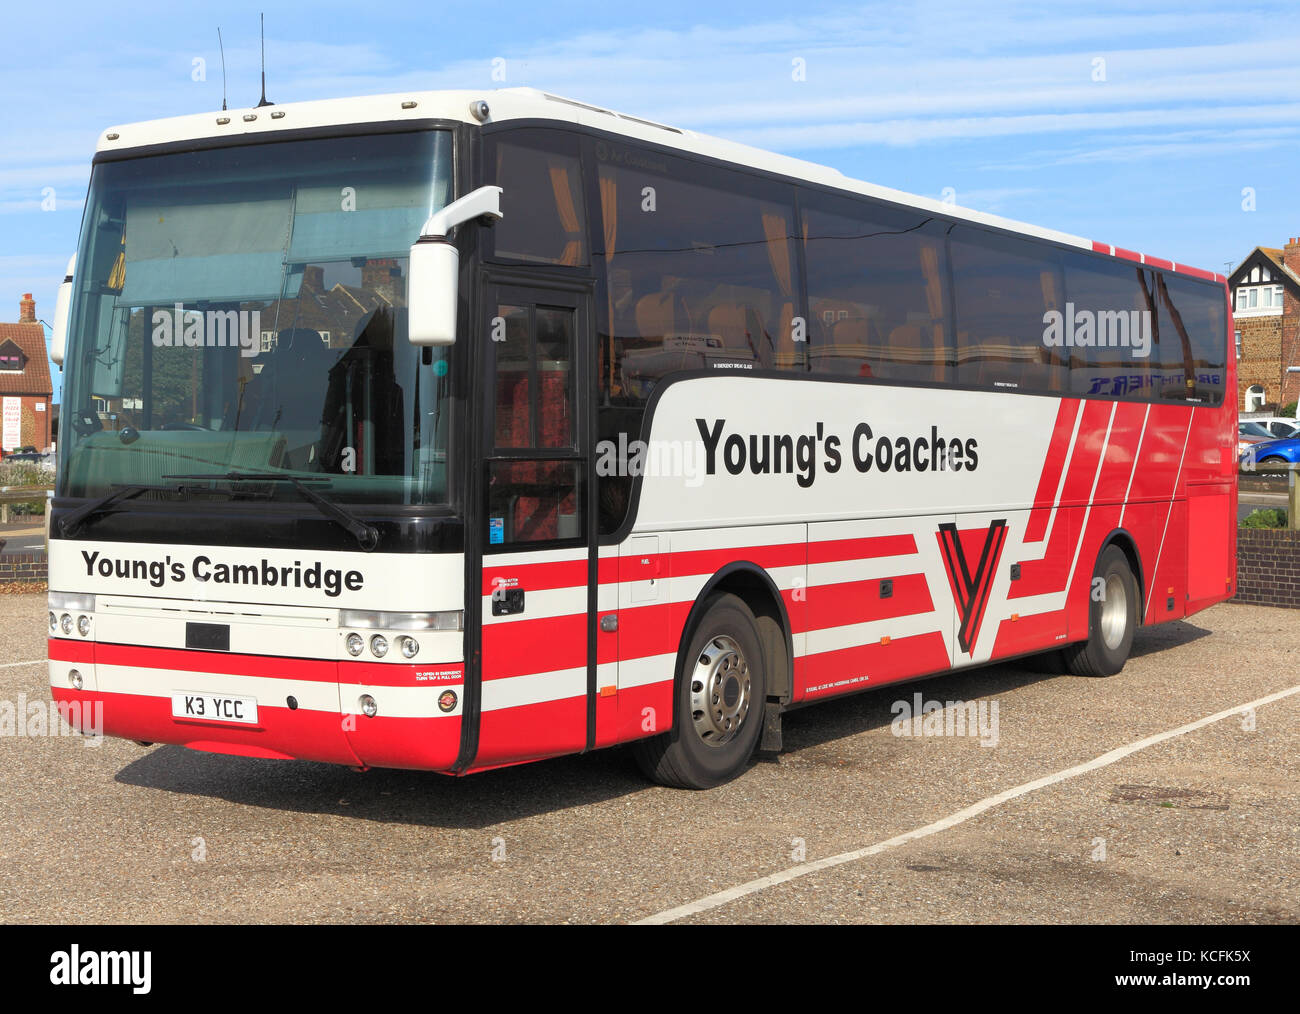 Young's Coaches, coach, day trips, trip, excursions. excursion, holiday, holidays, travel company, companies, transport, bus, England, UK Stock Photo